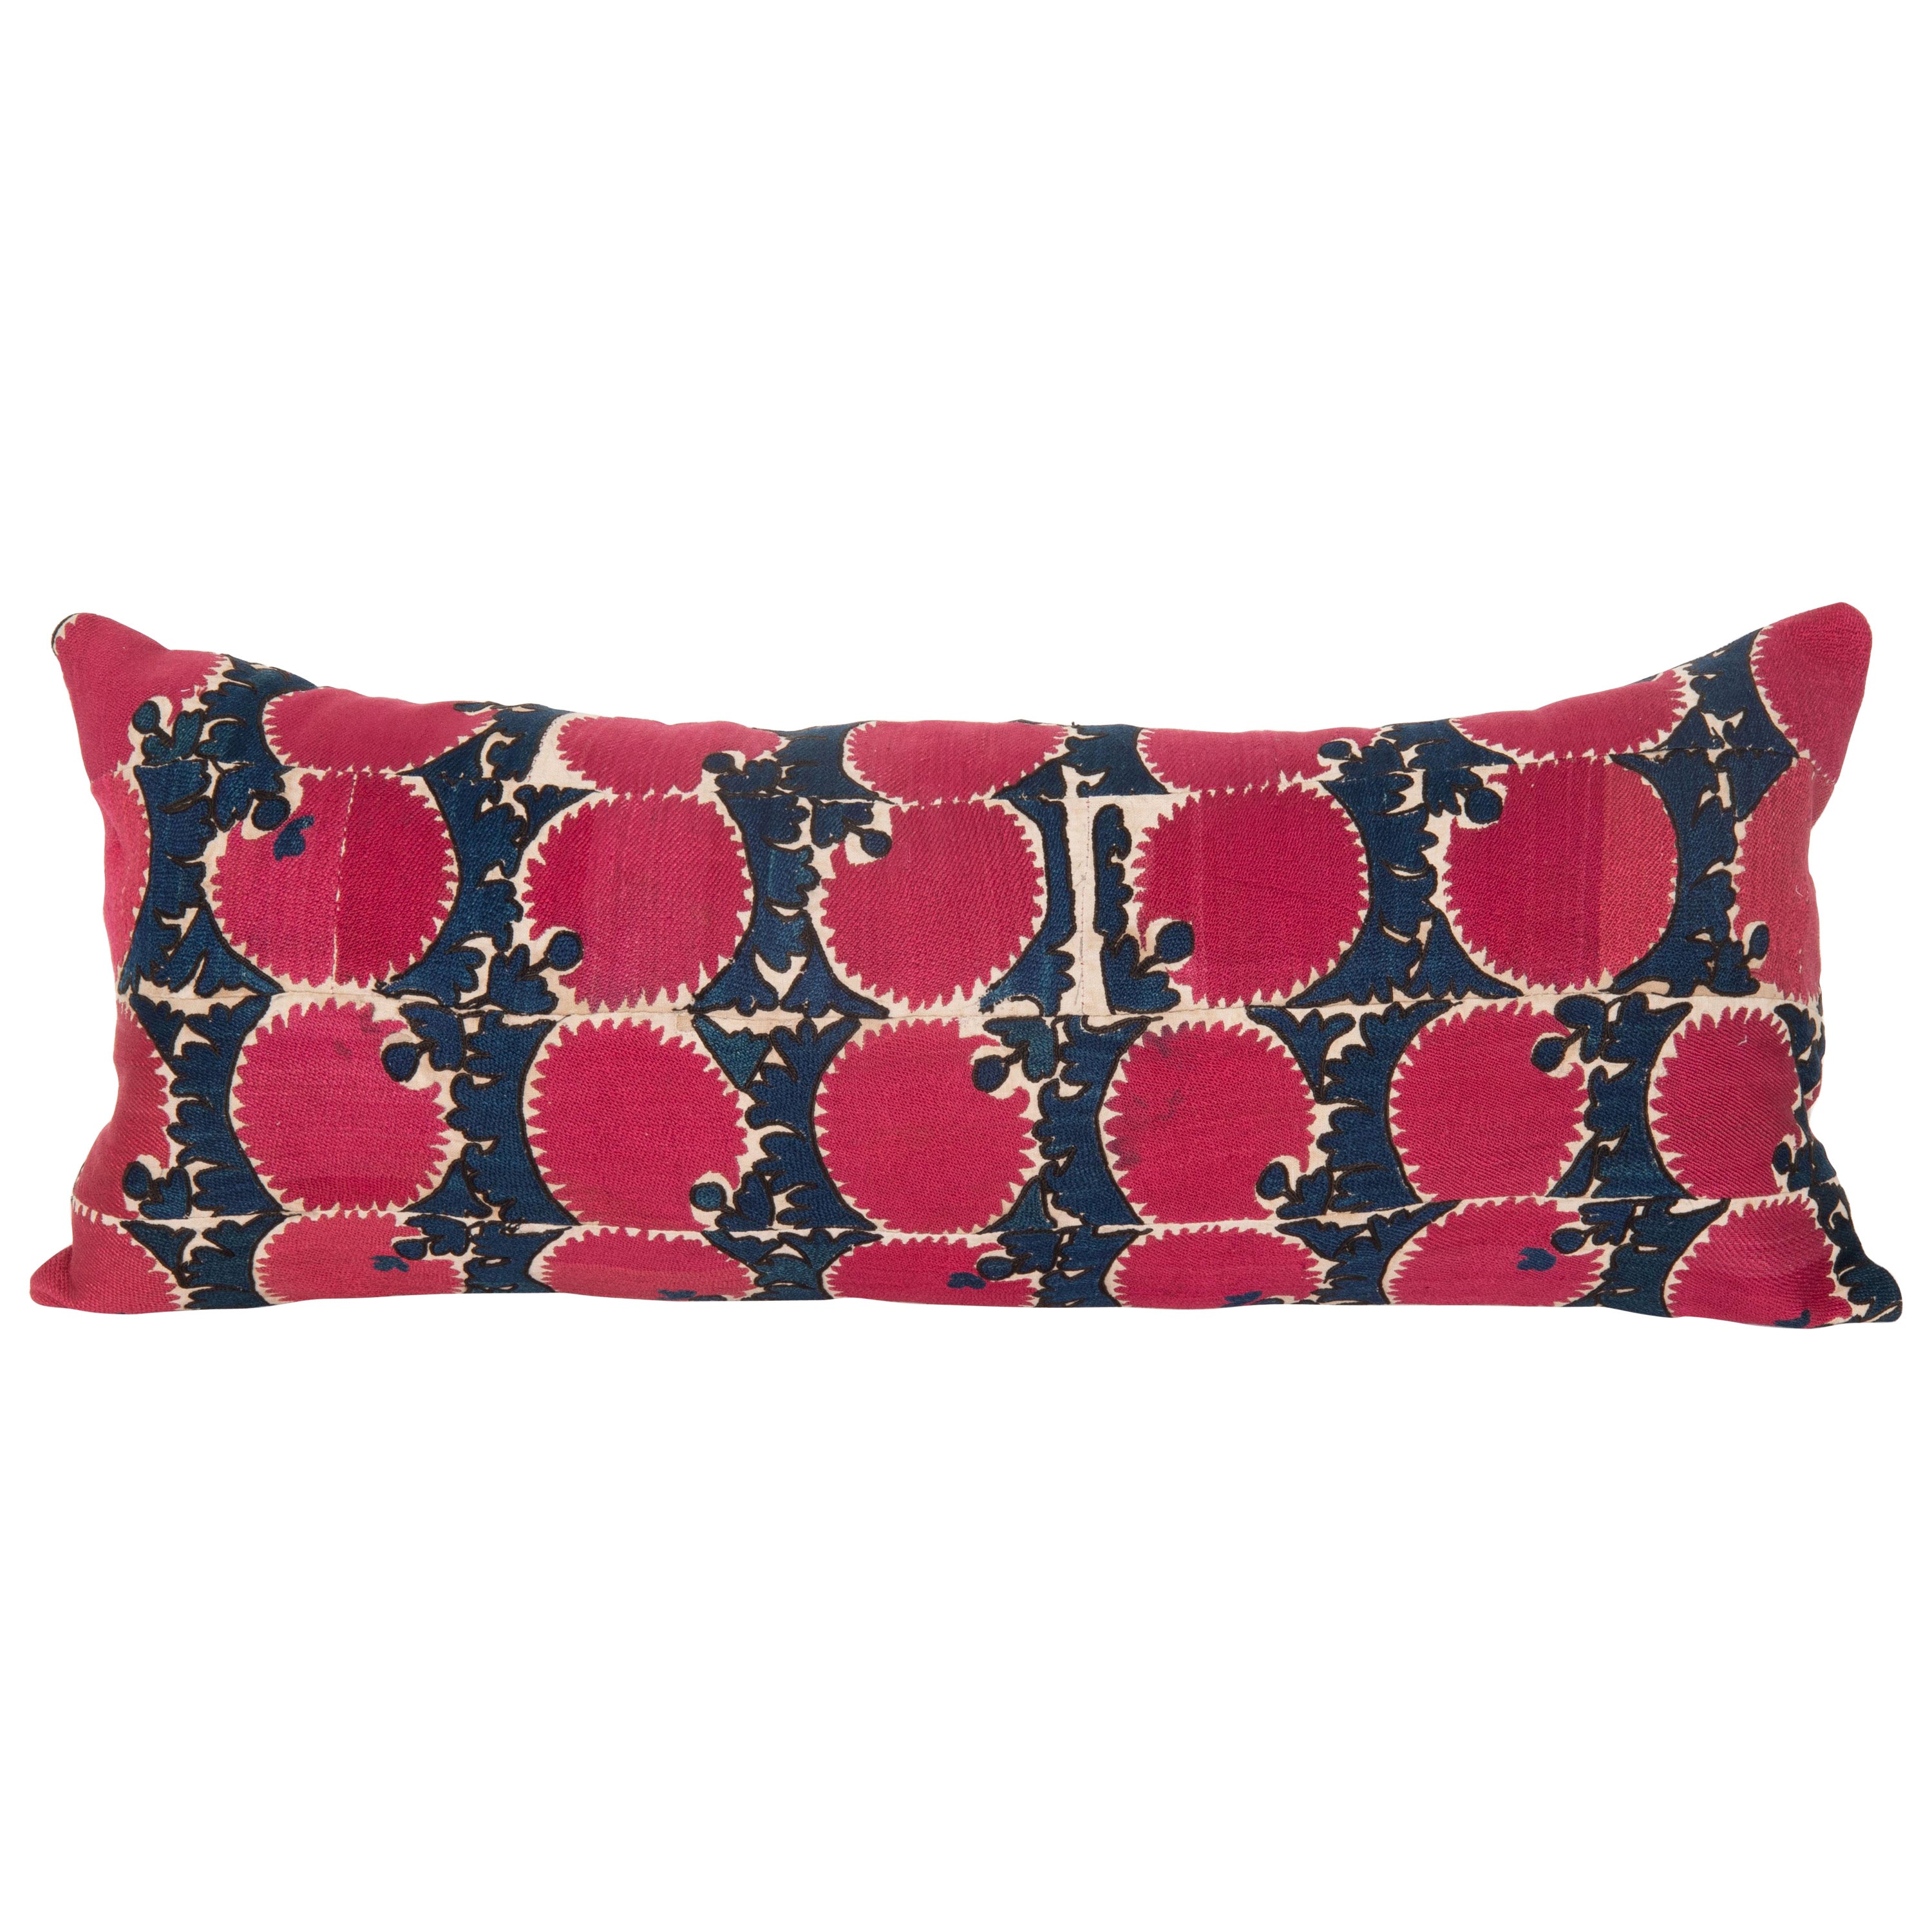 Antique pillow cover Made from a 19th C. Suzani Fragment For Sale